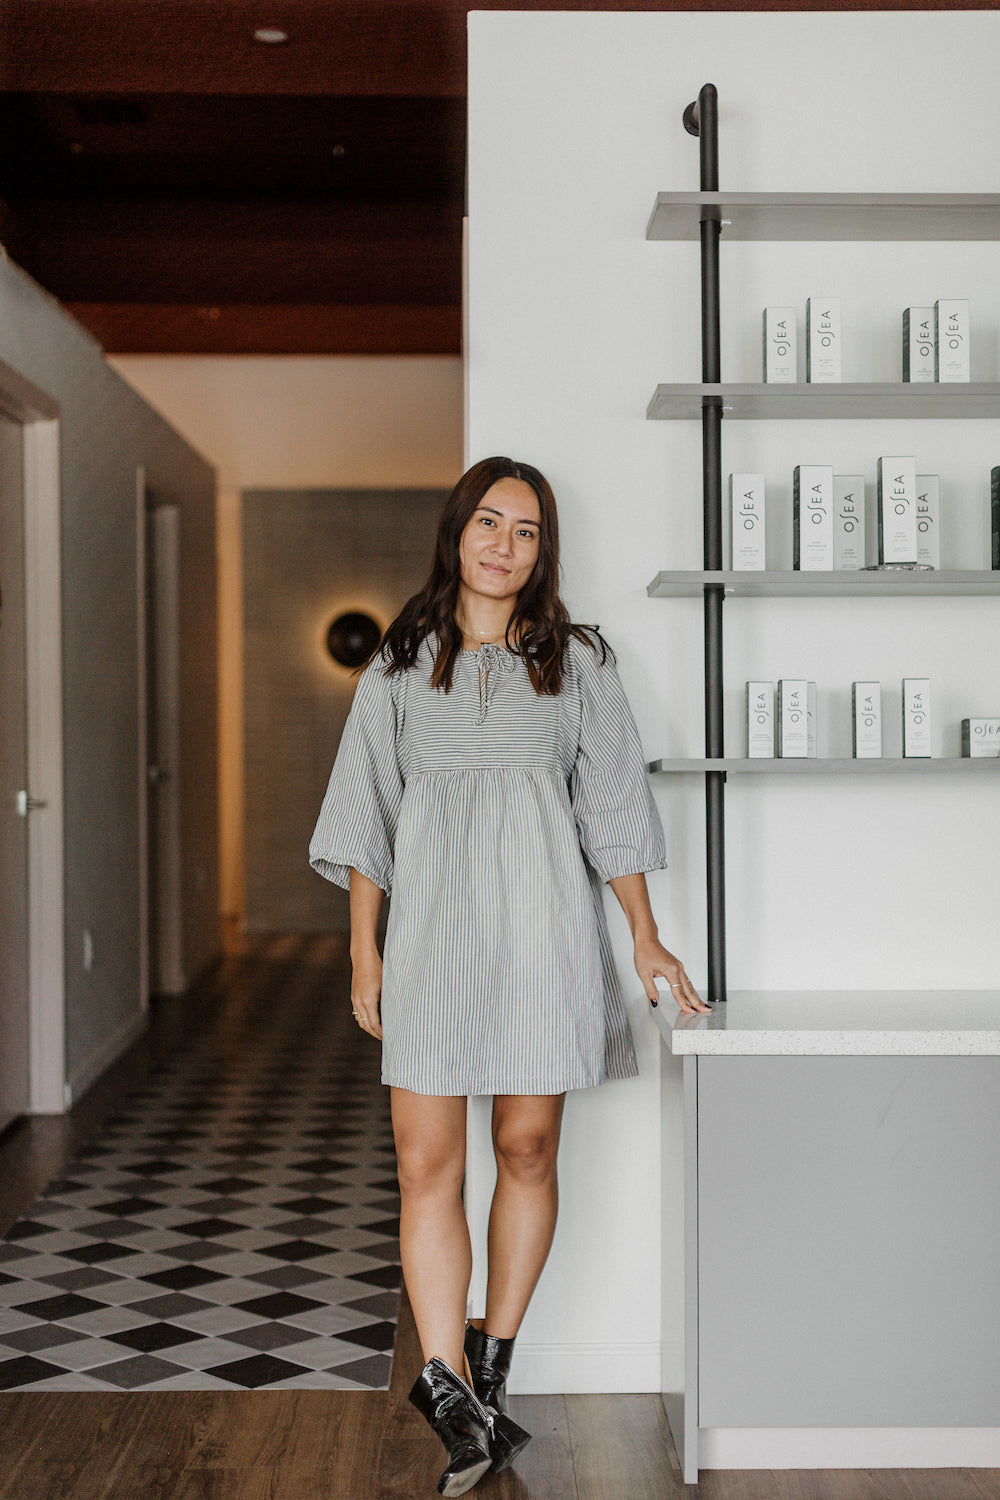 Pre-pandemic Skincare with Beauty Influencer Cynthia Ess